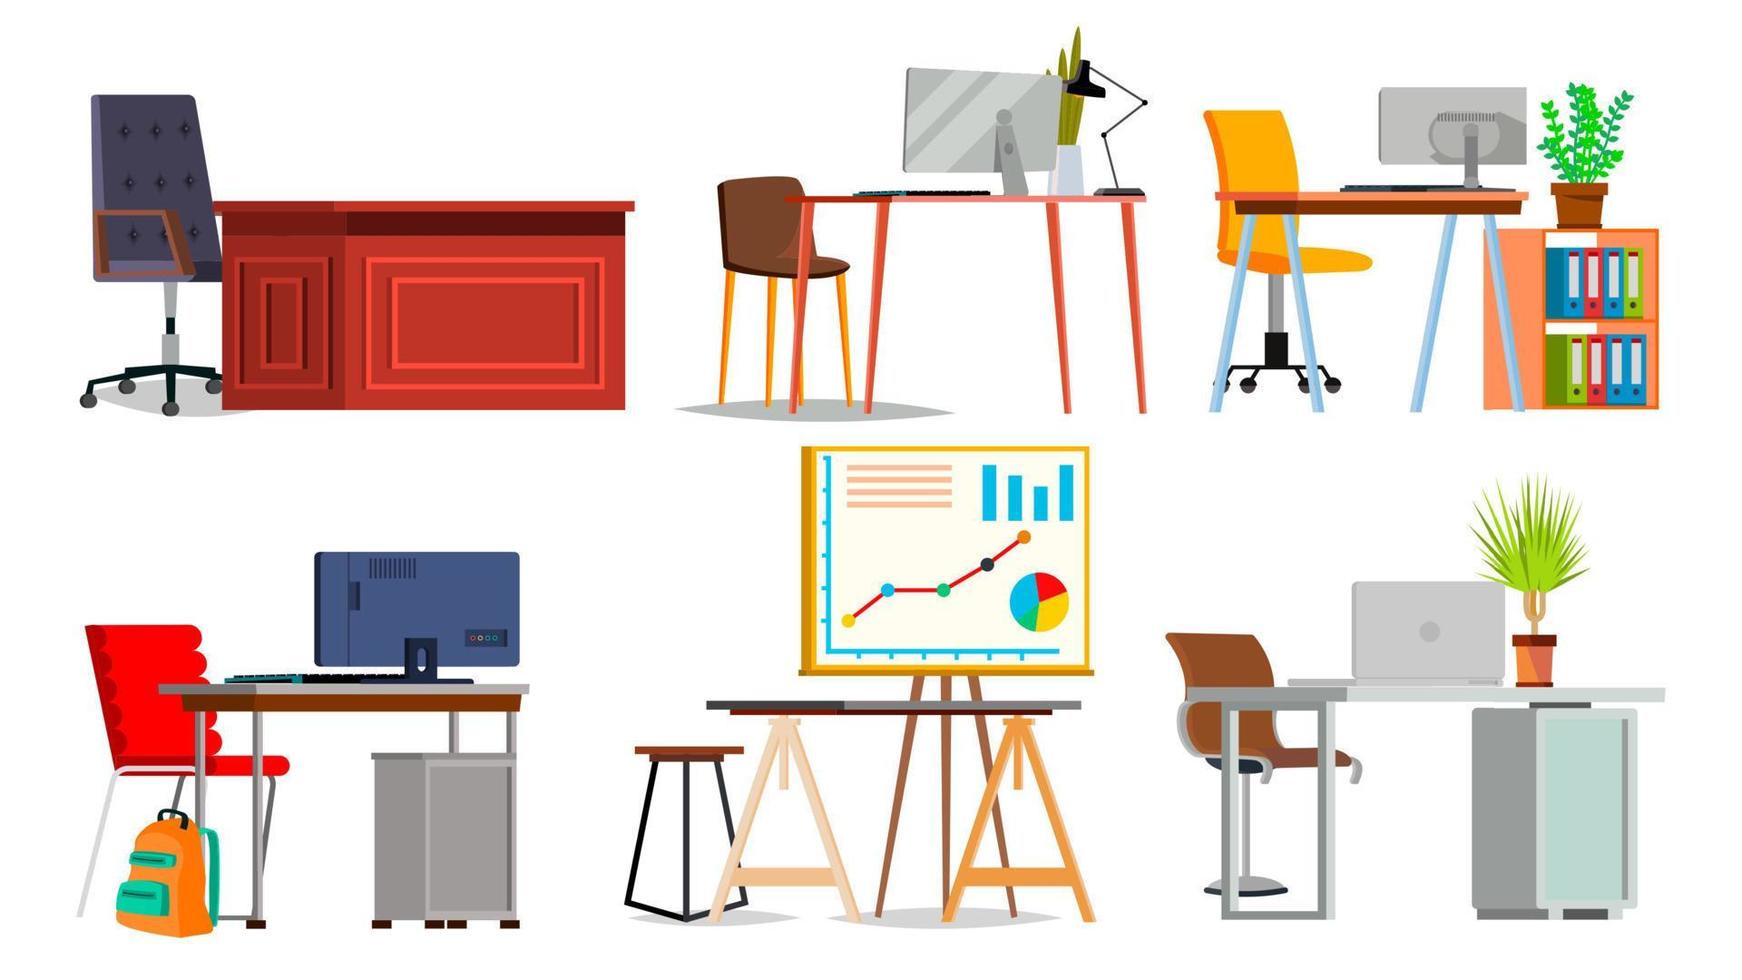 Office Workplace Set Vector. Interior Of The Office Room, Creative Developer Studio. PC, Computer, Laptop, Table, Chair. Interior. Furniture Workplace For Programmer, Designer, Salesman. Isolated vector